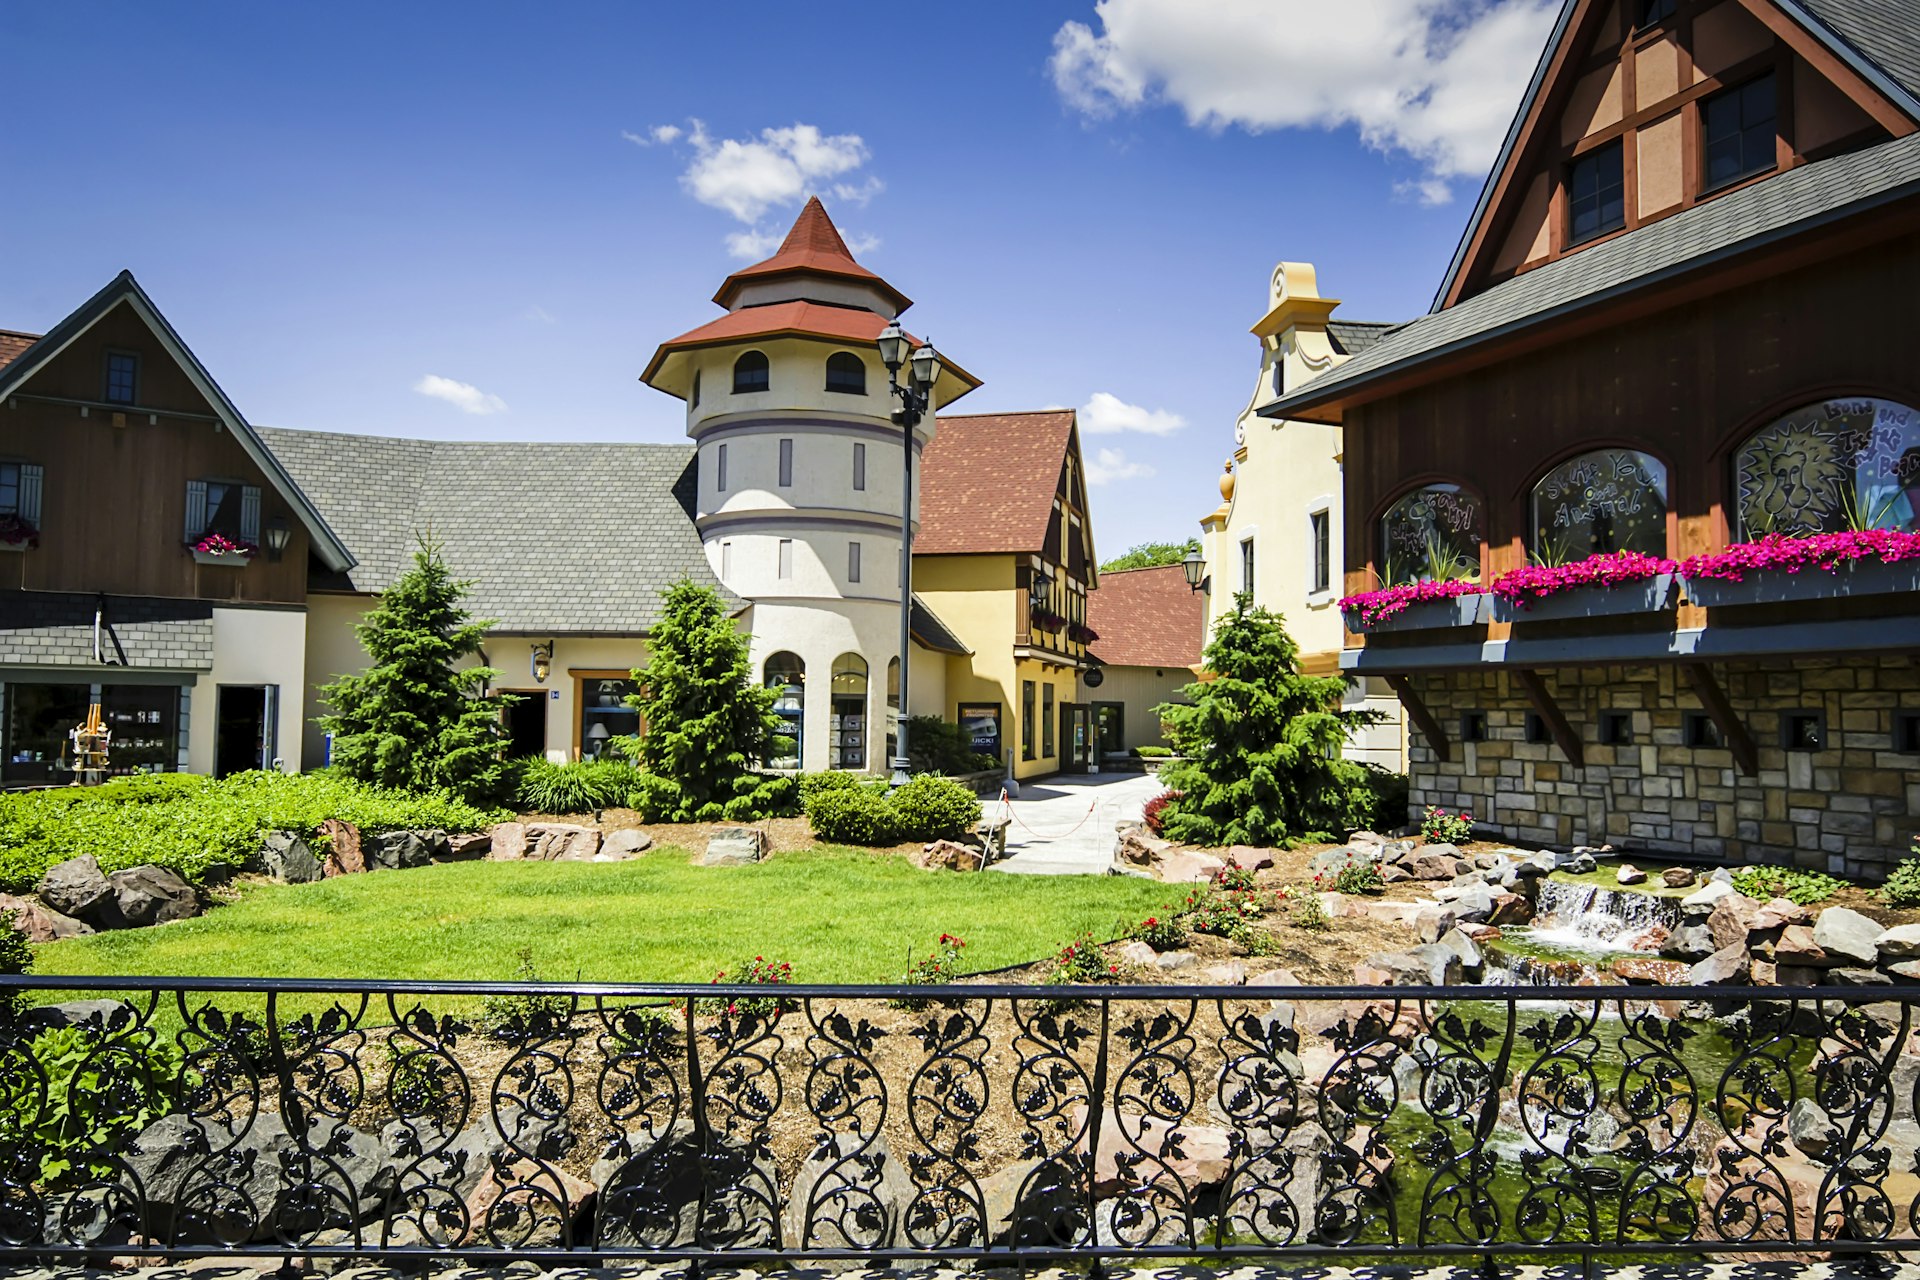 The Bavarian style riverplace shopping Plaza in Frankenmuth